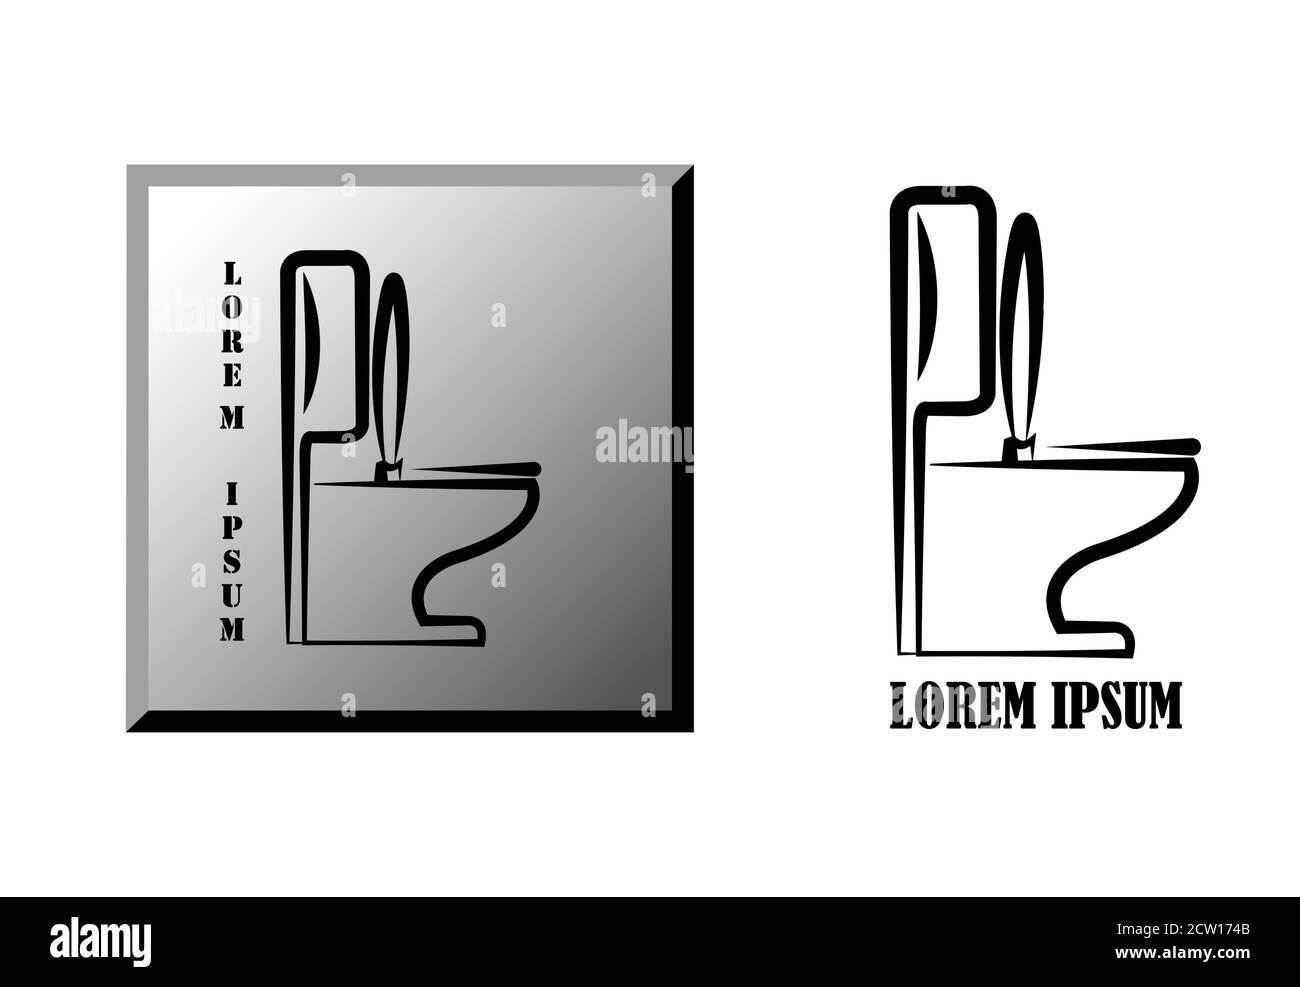 Western style toilet seat logo design in different colour combinations. Stock Vector